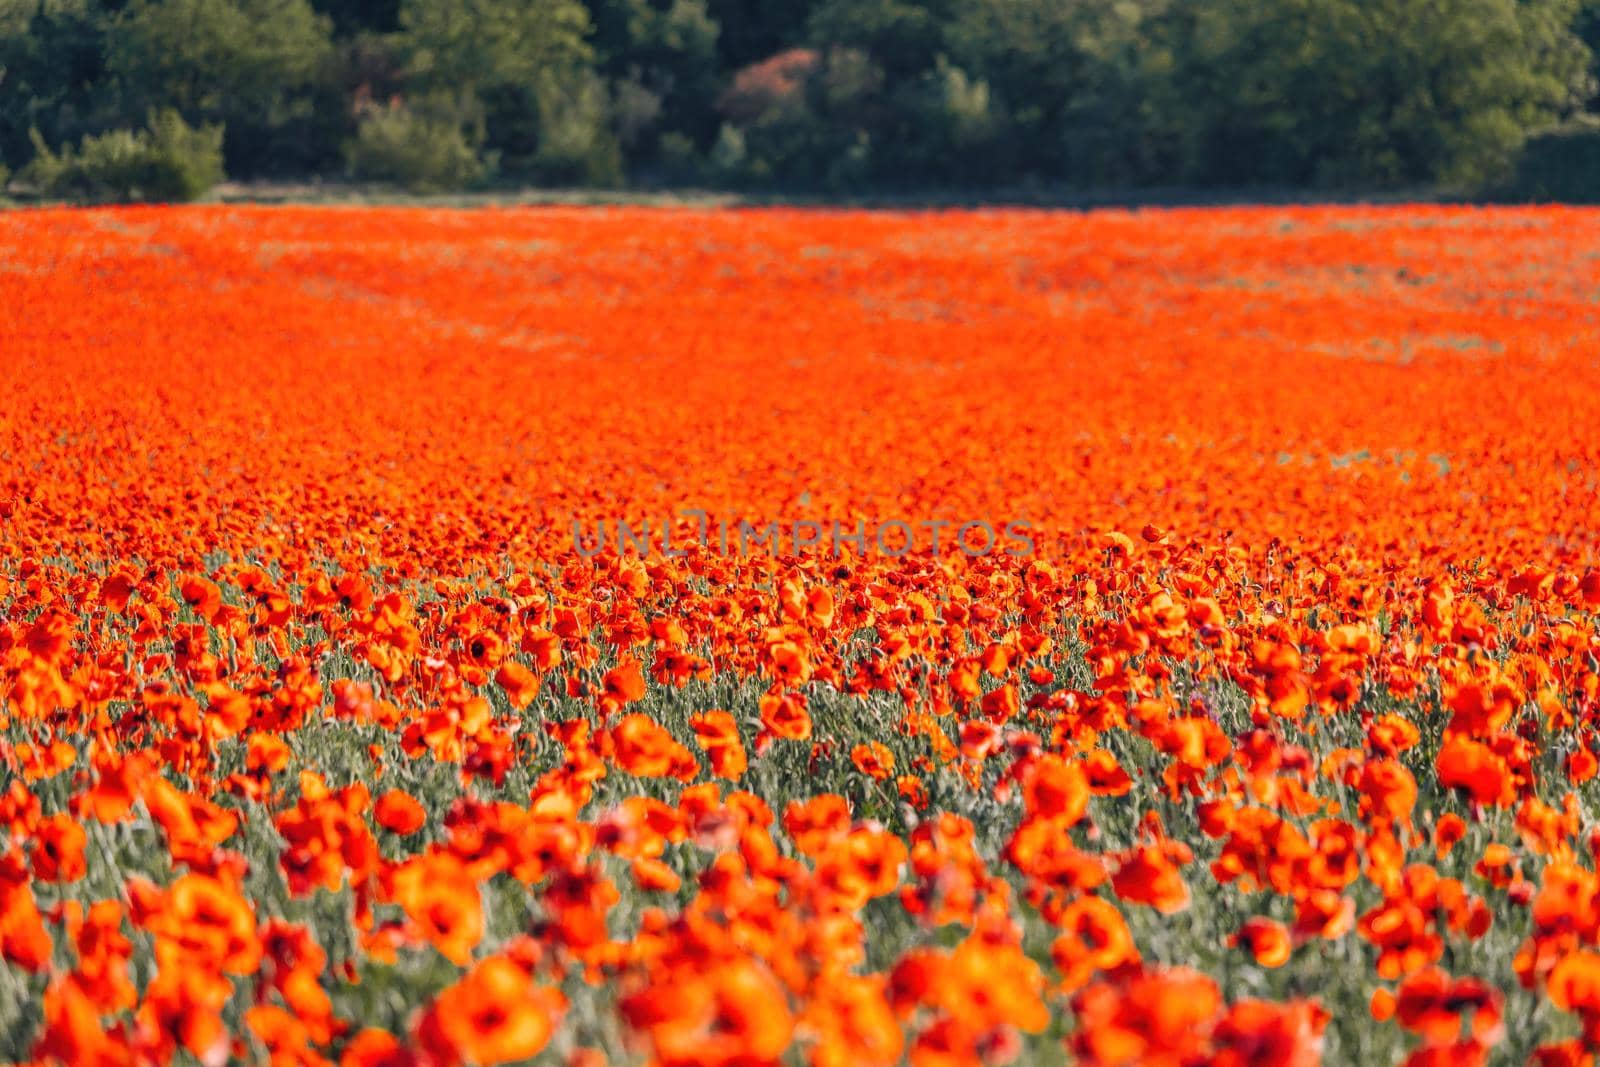 Large Field with red poppies and green grass at sunset. Beautiful field scarlet poppies flowers with selective focus. Red poppies in soft light. Glade of red poppies. Soft focus blur. Papaver sp